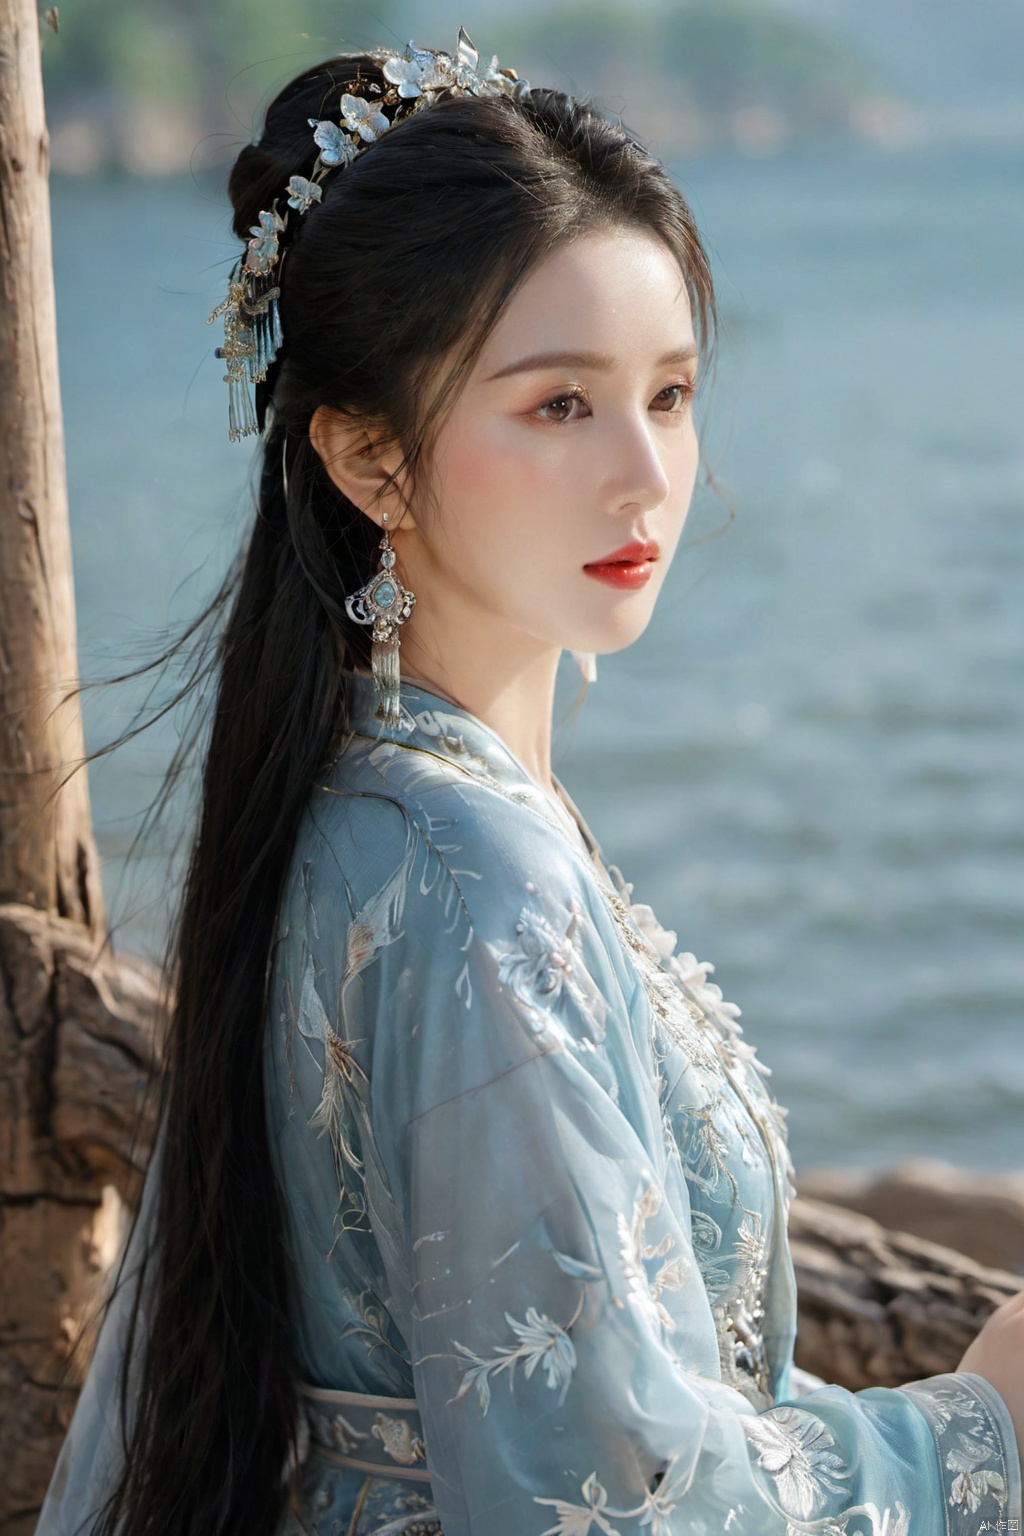  masterpiece, best quality, highly detailed, (photorealistic:1.4), (upper body shot), (upper body view), 1girl,red hanfu, (clothing out of ultra-thin transparent invisible fabric:0.7),26 year old girl,mature *****,earrings,best quality,(photorealistic),transparent,the details are sharp yet possess an organic quality,and there's a subtle grain that adds a layer of depth and authenticity. (masterpiece, top quality, best quality, beautiful and aesthetic:1.2),((upper body)),long hair,black hair,earrings,cute,extreme detailed,(abstract,fractal art),highest detailed,lightning,(water:1.2),(splash_art:1.2),jewelry:1.2,scenery,ink,white wedding dress,high heels, Miao clothing, hhfhb, daxiushan